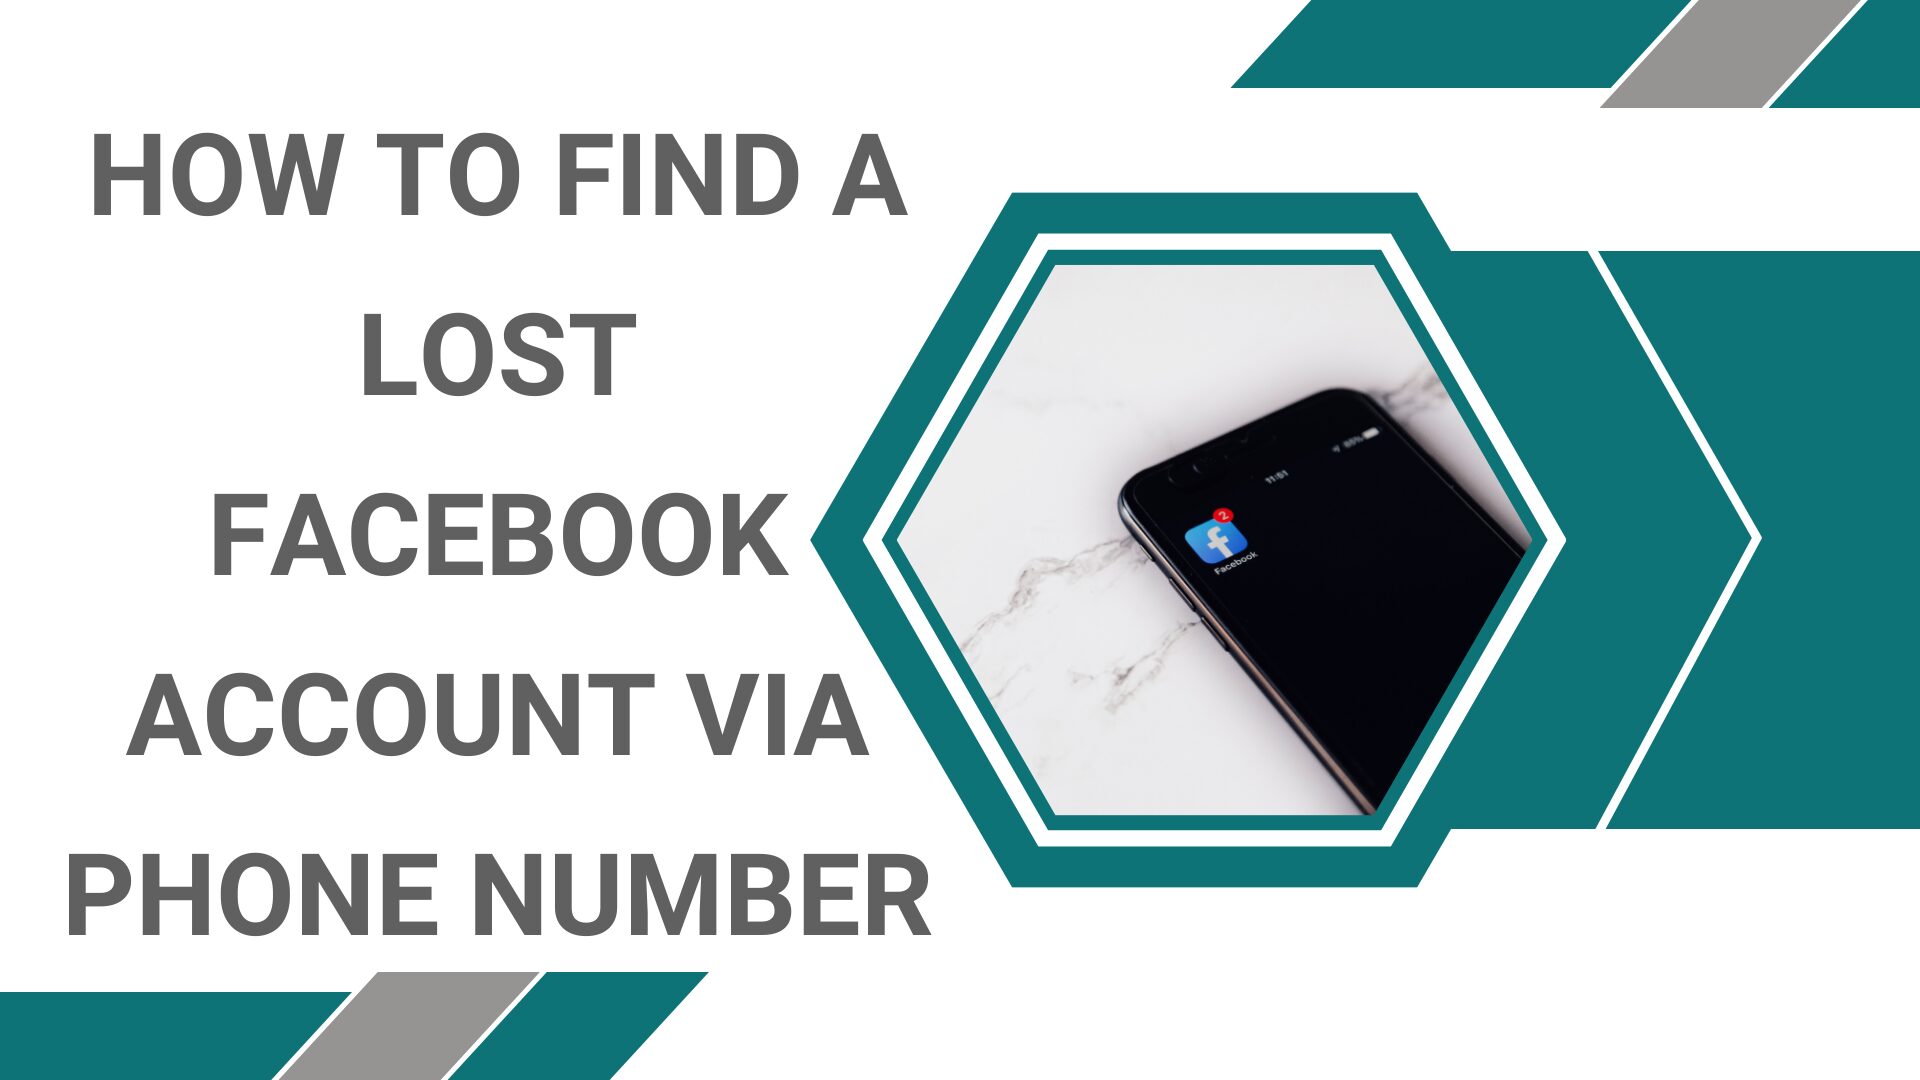 How to find a lost Facebook account via phone number